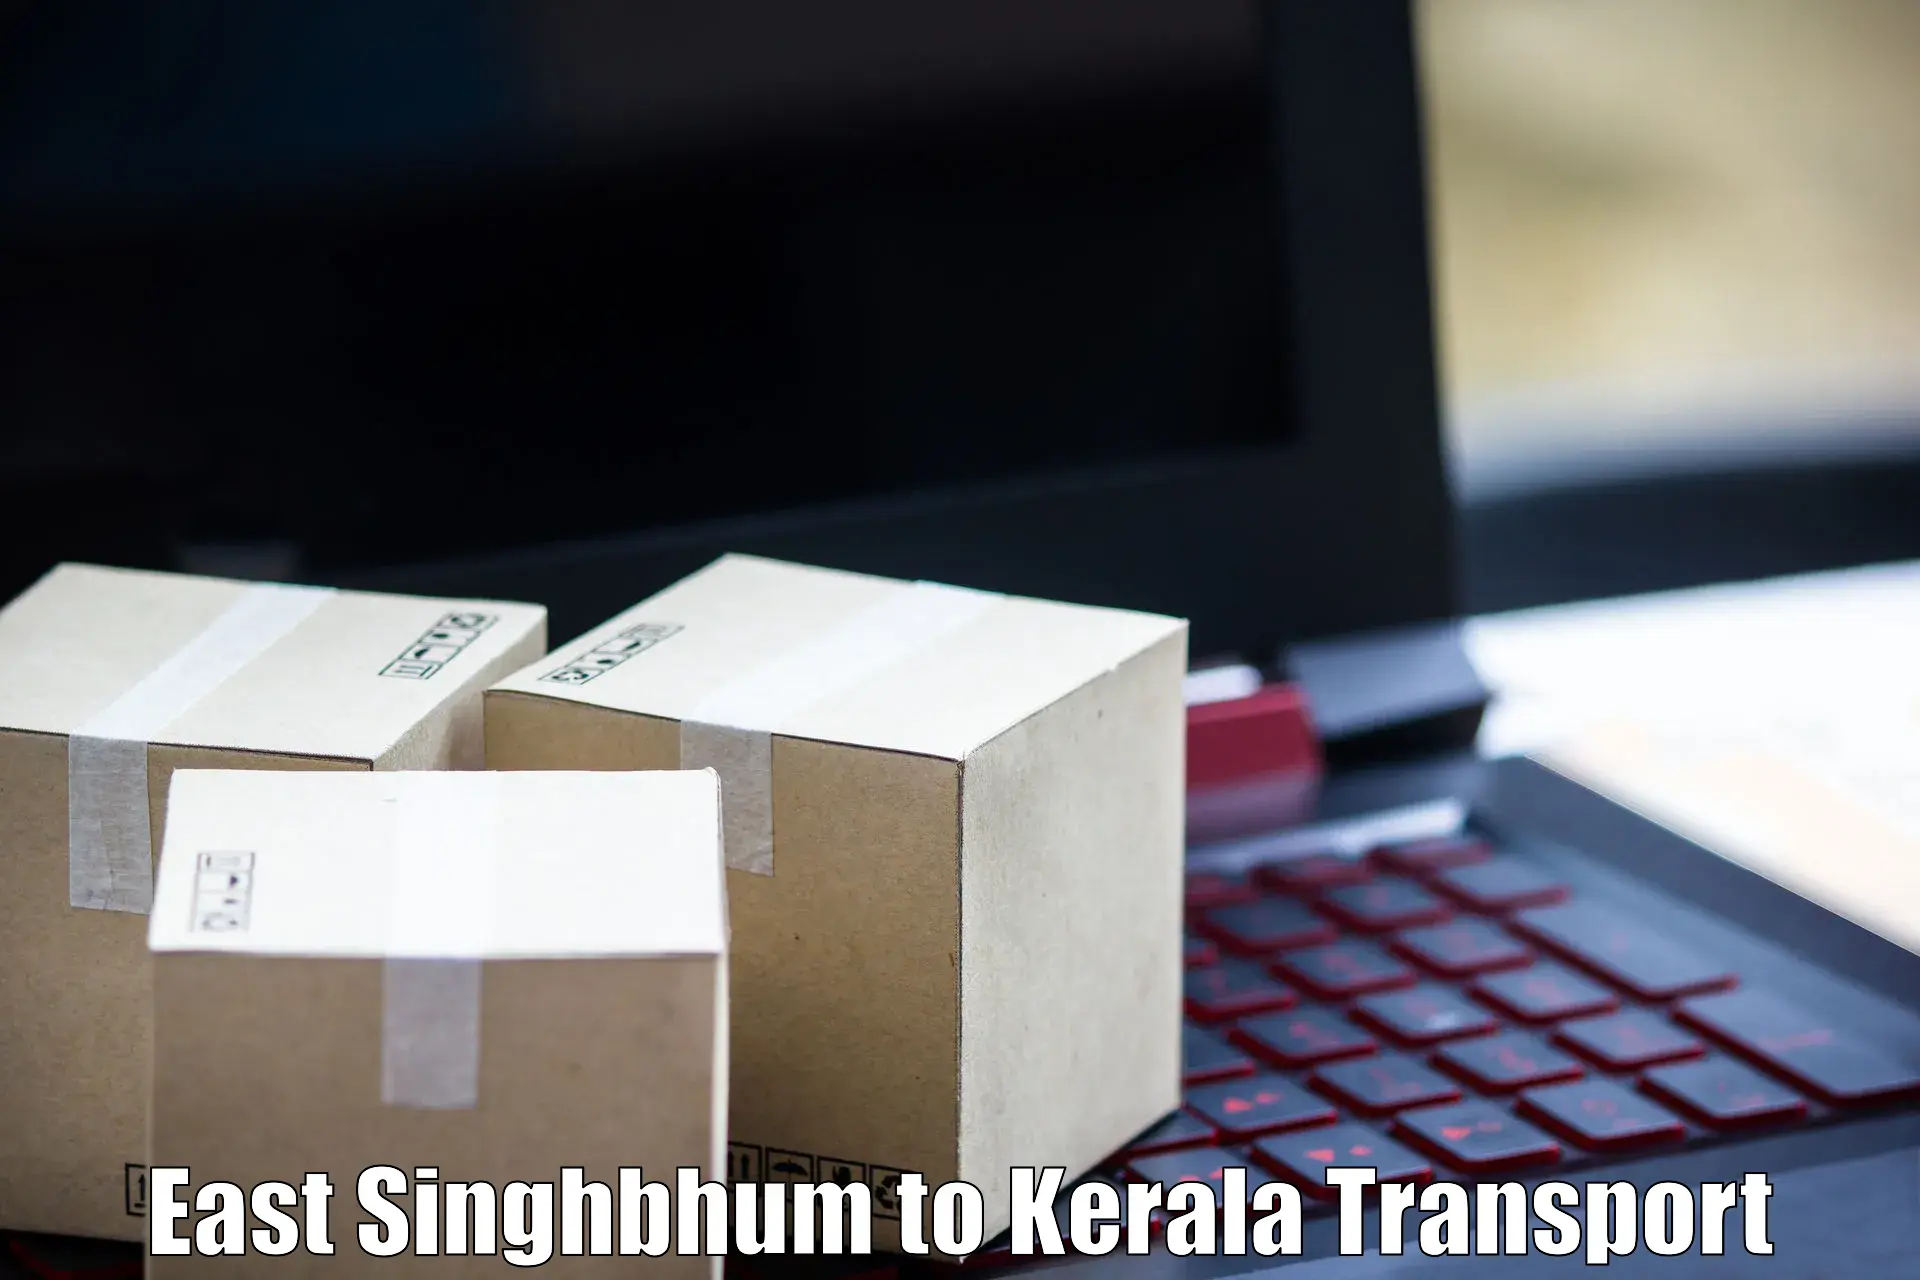 Express transport services East Singhbhum to Pathanamthitta